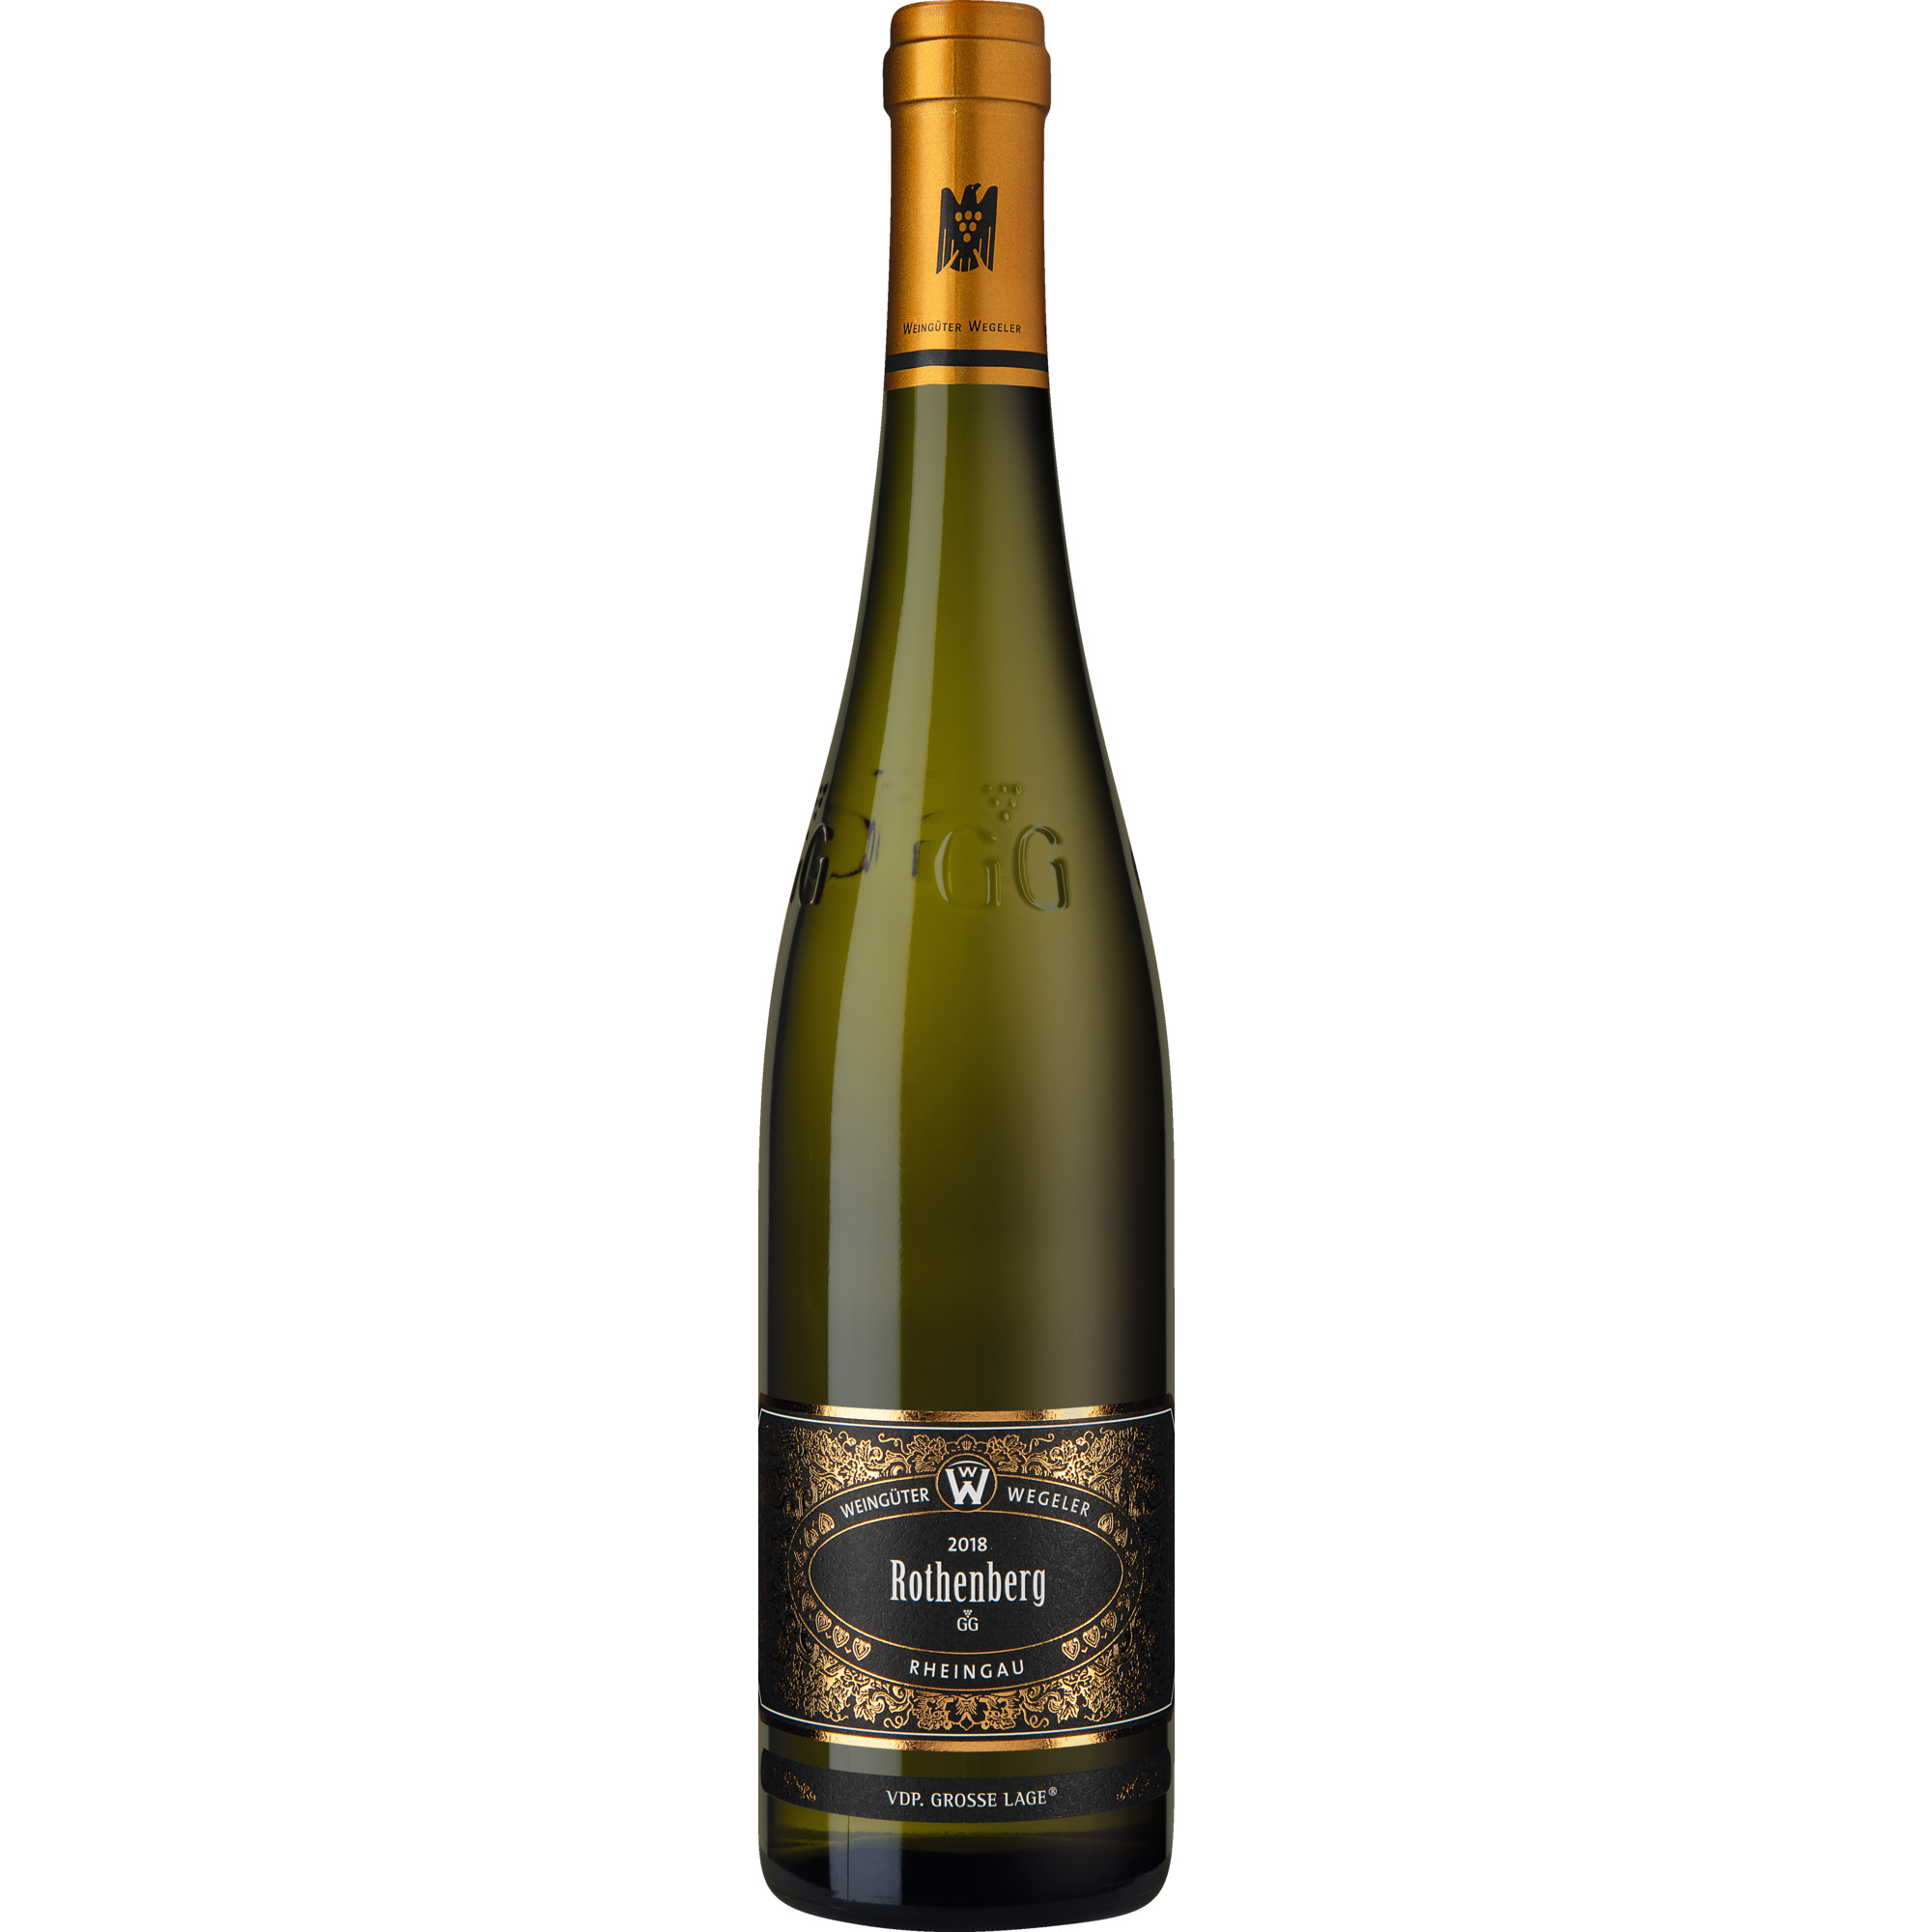 2018 Rothenberg Riesling GG